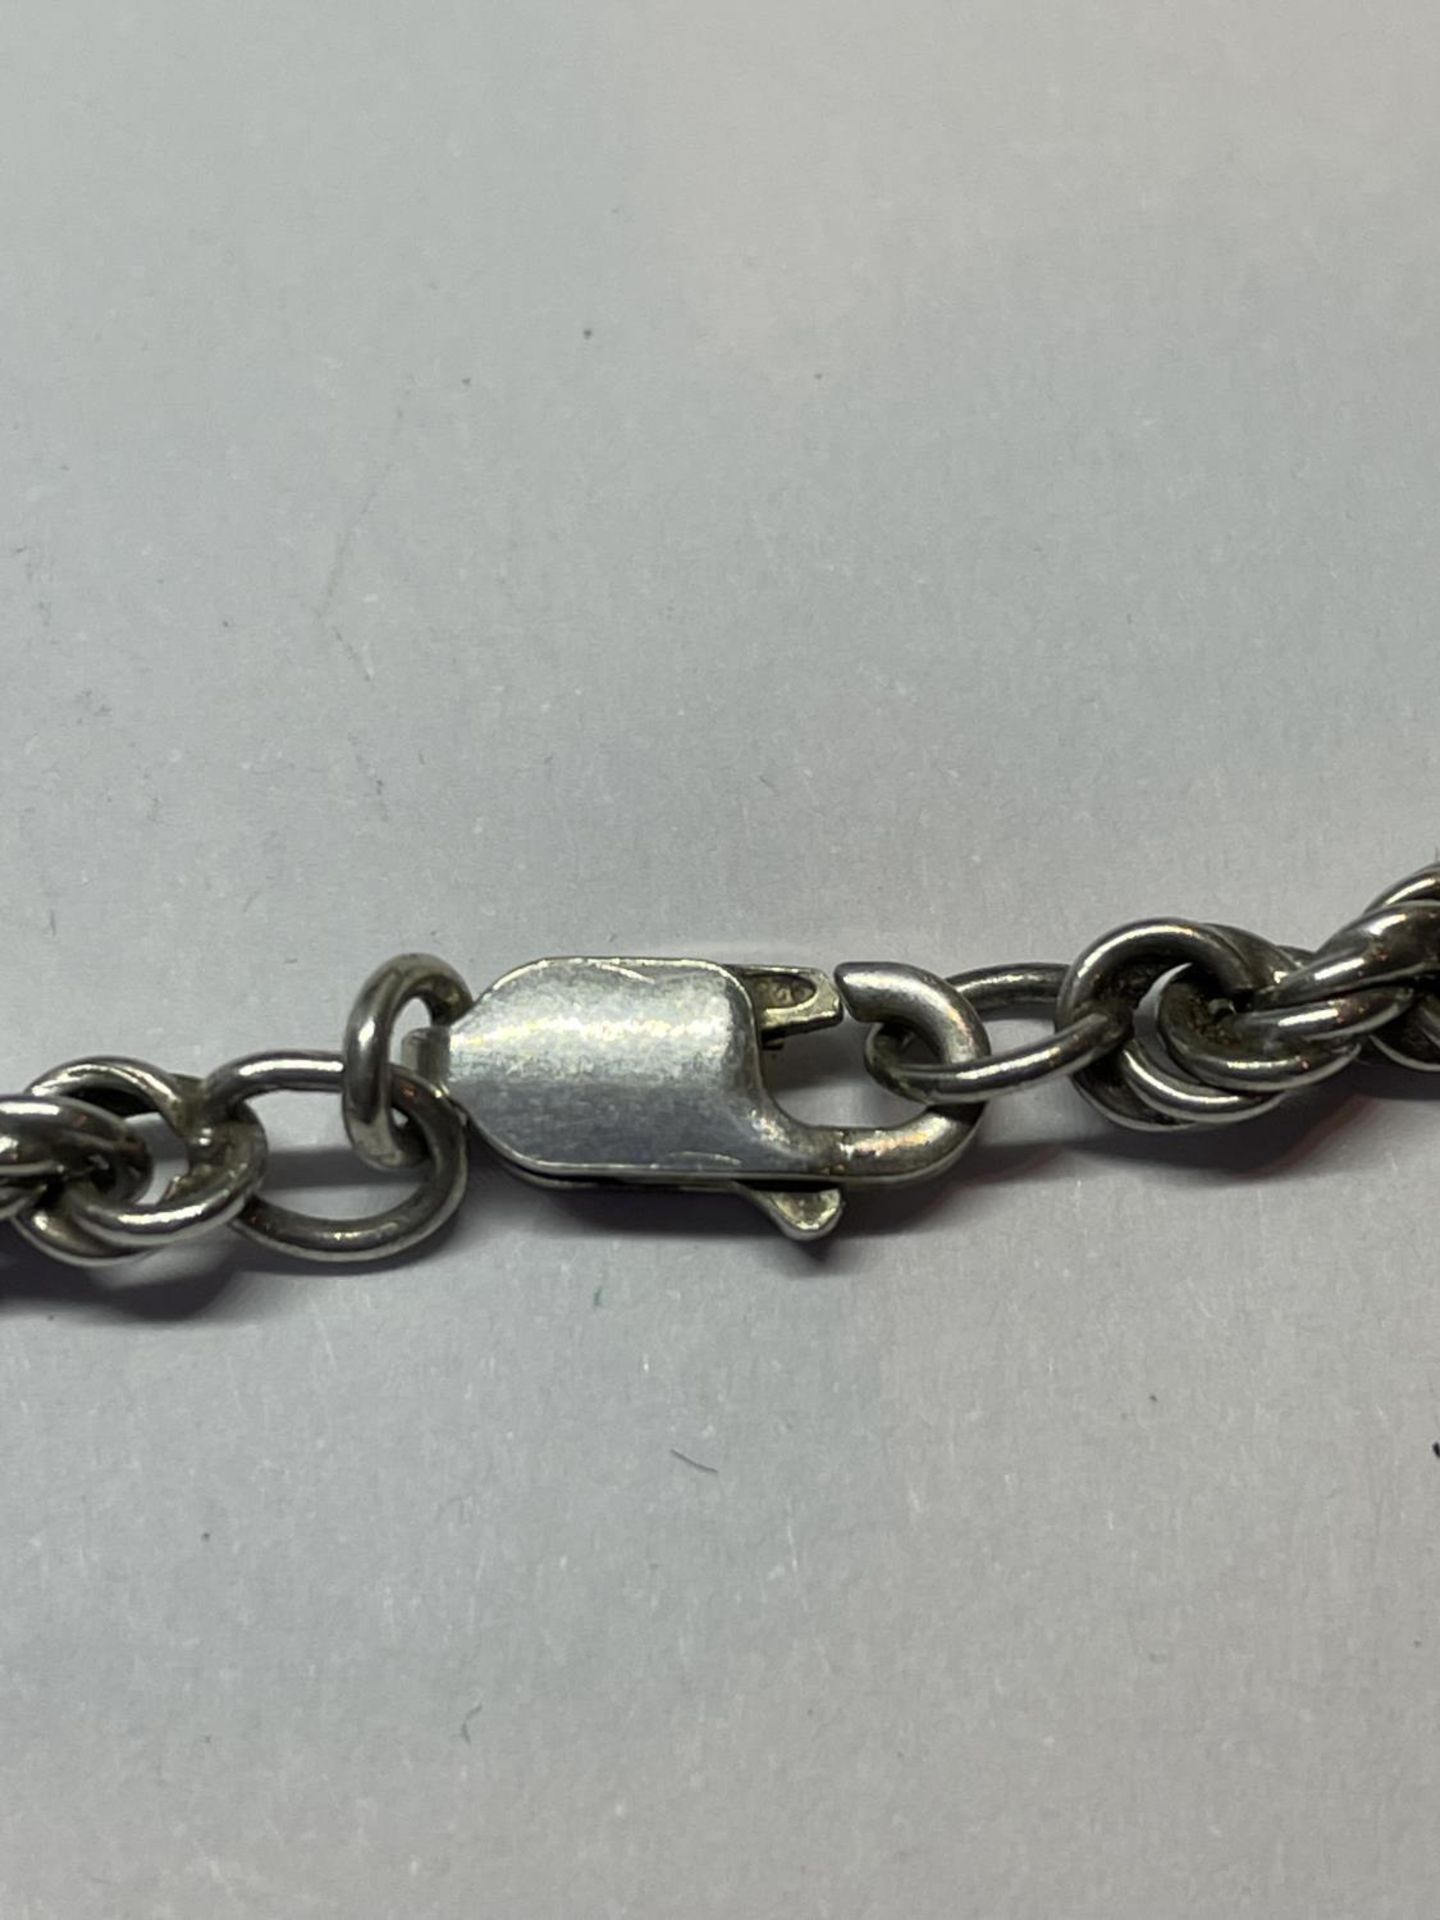 A MARKED SILVER ROPE NECKLACE 60 CM LONG - Image 3 of 3